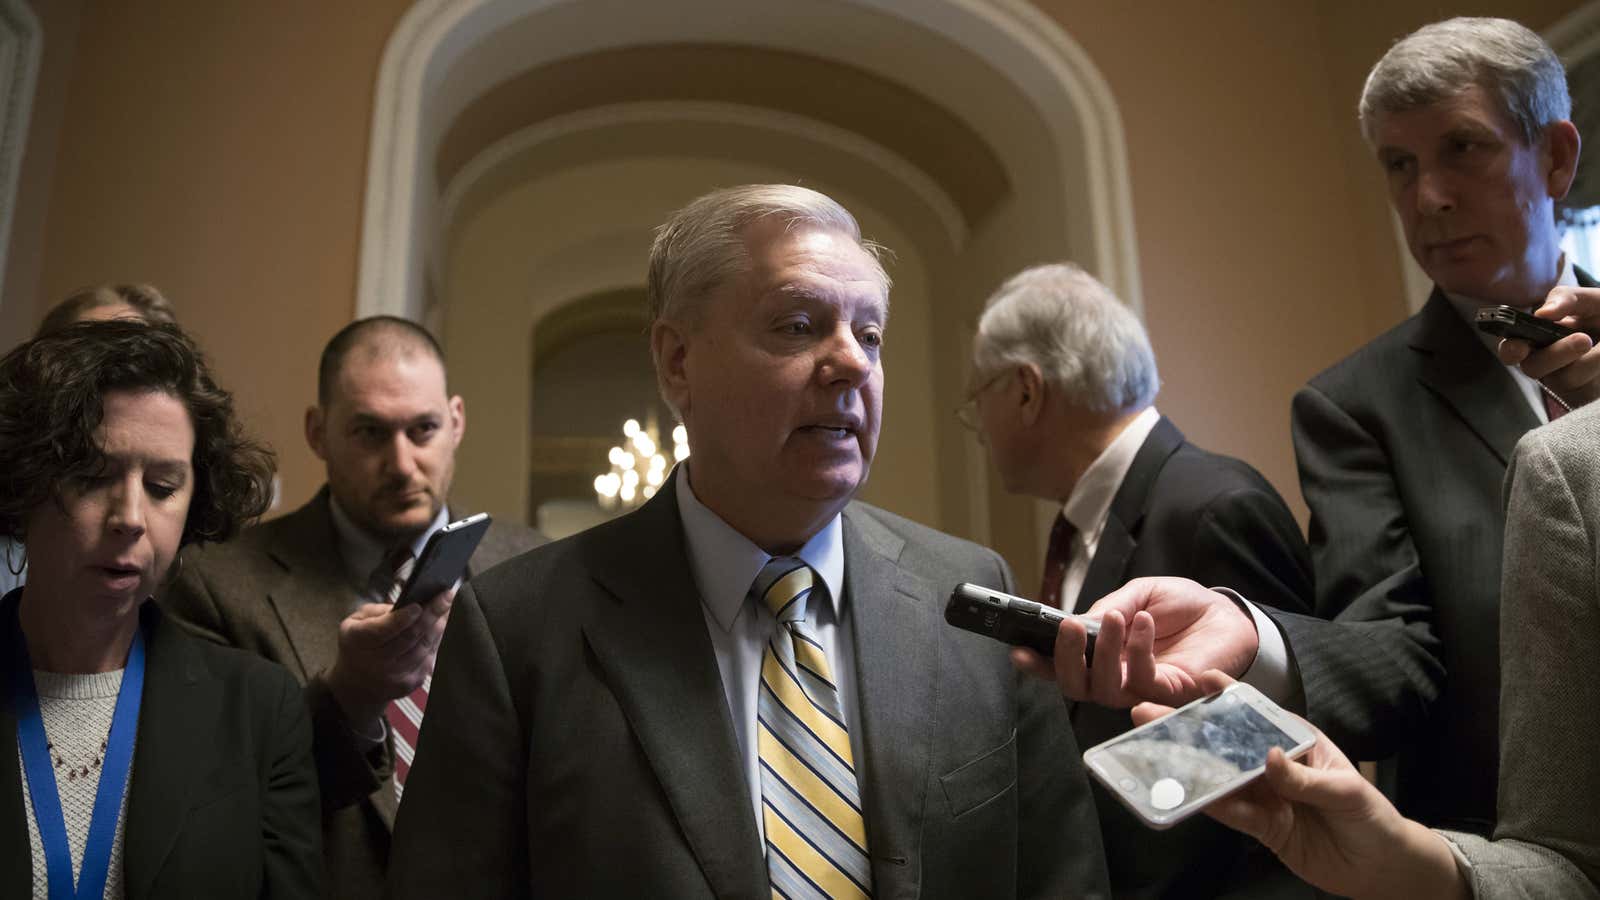 Lindsey Graham is one of two senators who asking for a criminal probe into Steele.